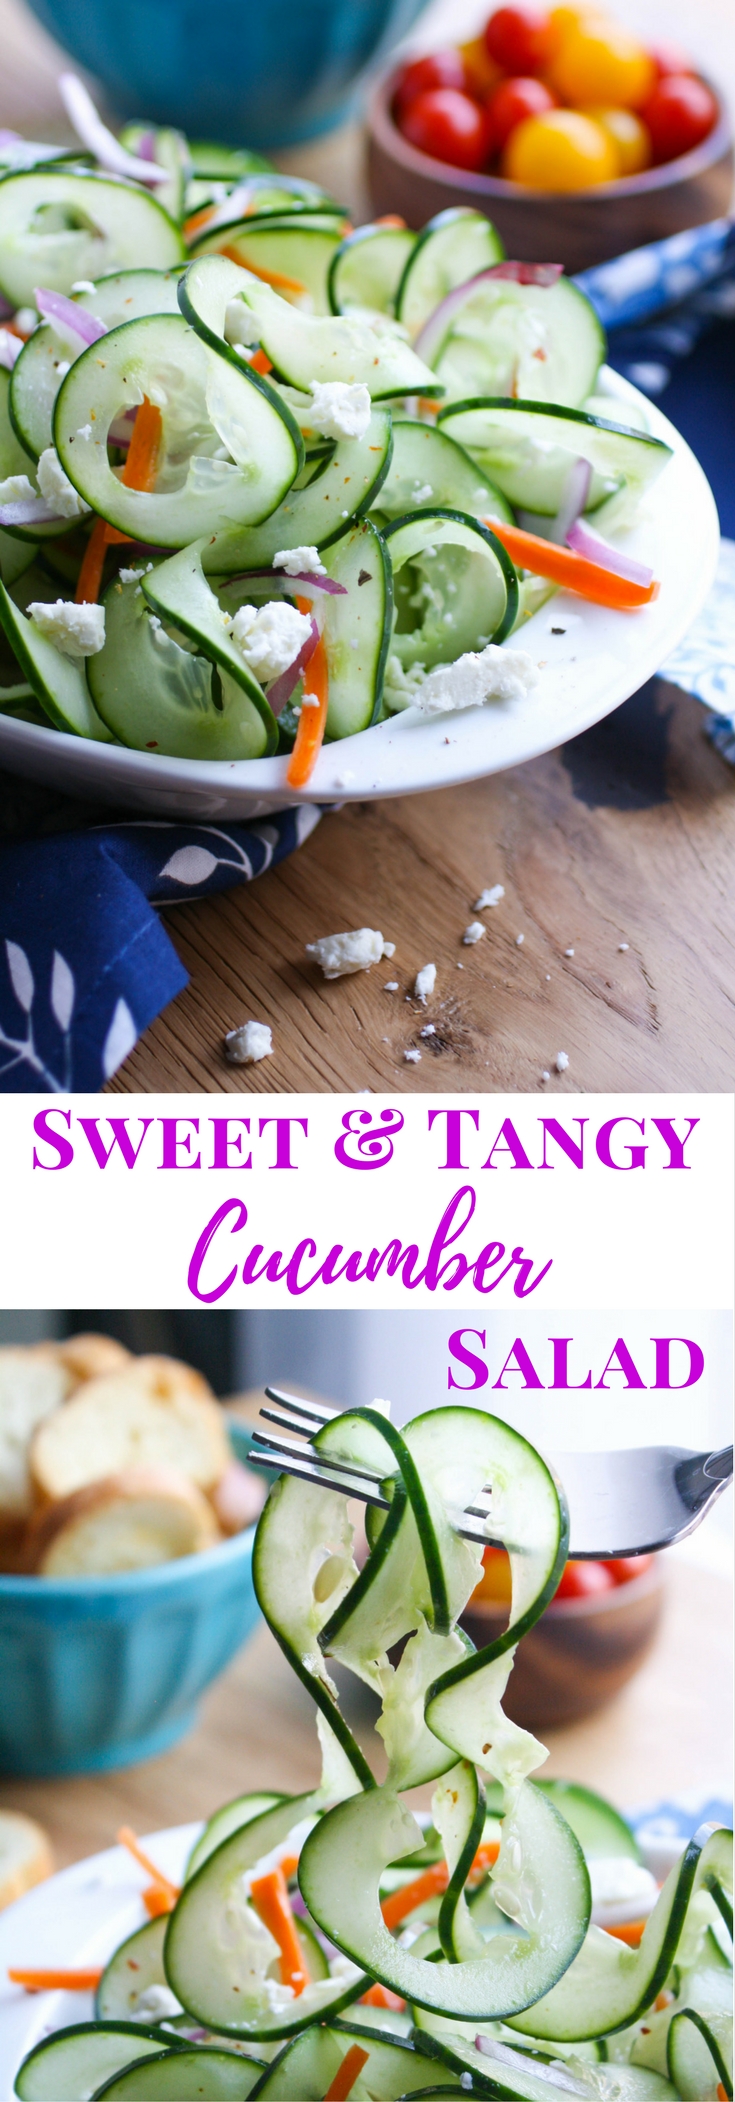 Sweet and Tangy Cucumber Ribbon Salad is a delightful salad that's great anytime. You'll love the flavor from the cucumbers and the simple dressing.